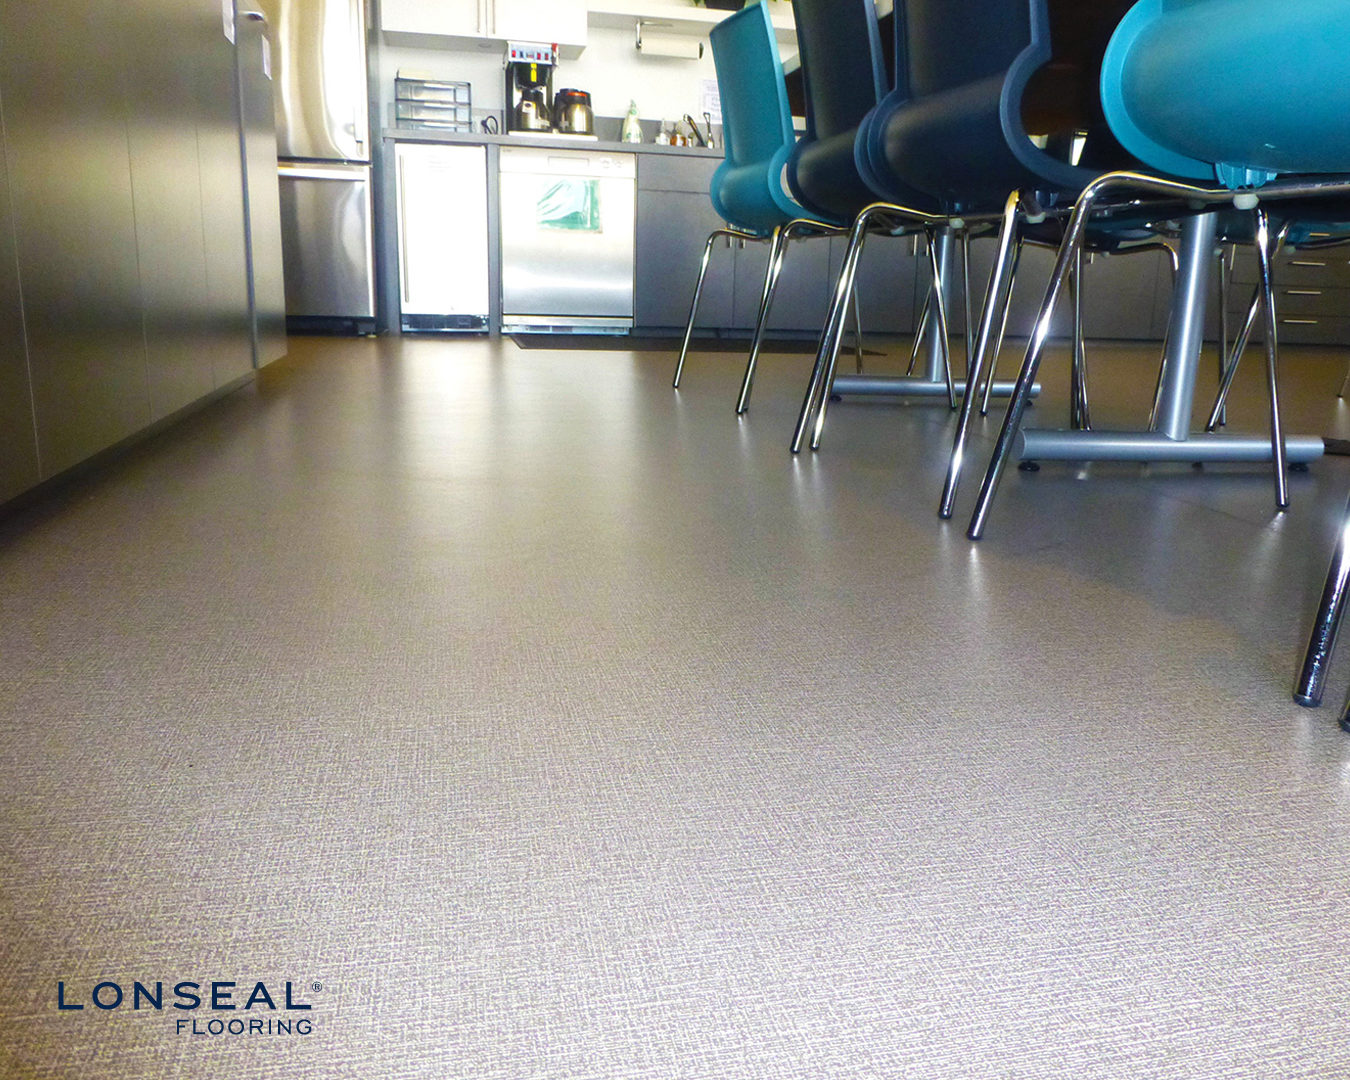 Lonseal, Sheet Vinyl Flooring, LONECO® LINEN, features a loose woven design that gives a hip, stylish touch to any interior